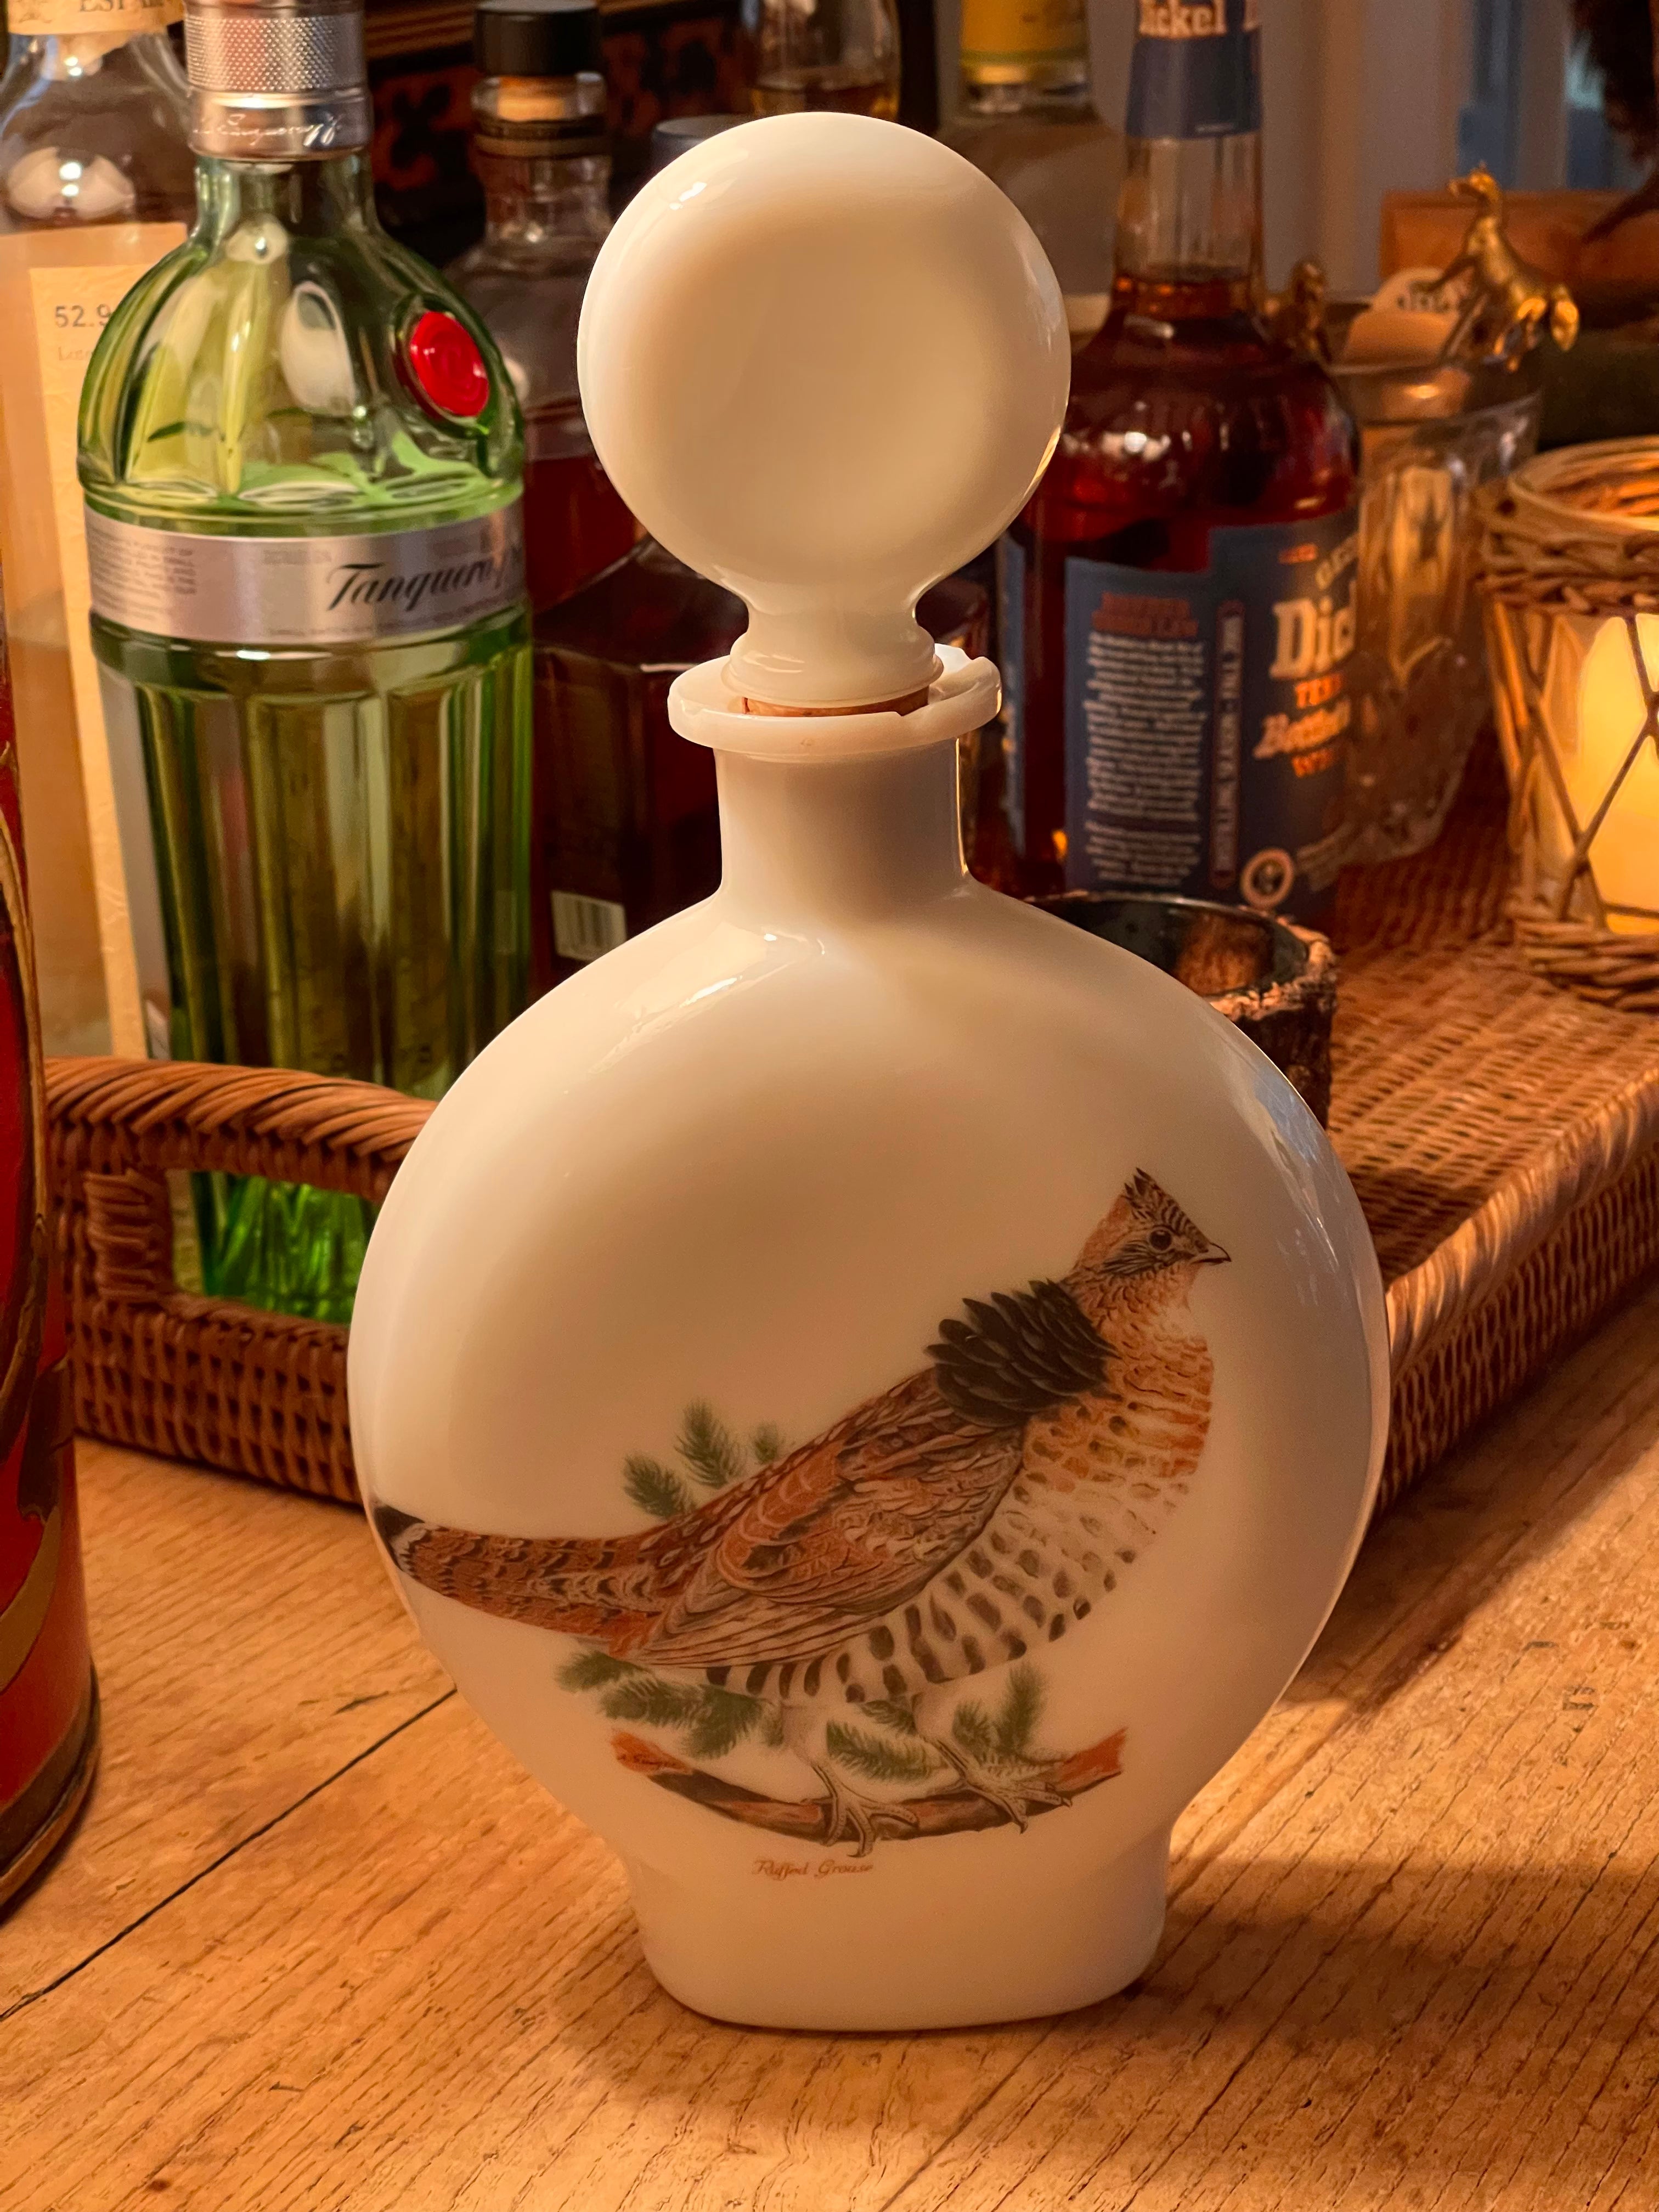 Vintage Ruffed Grouse Decanter